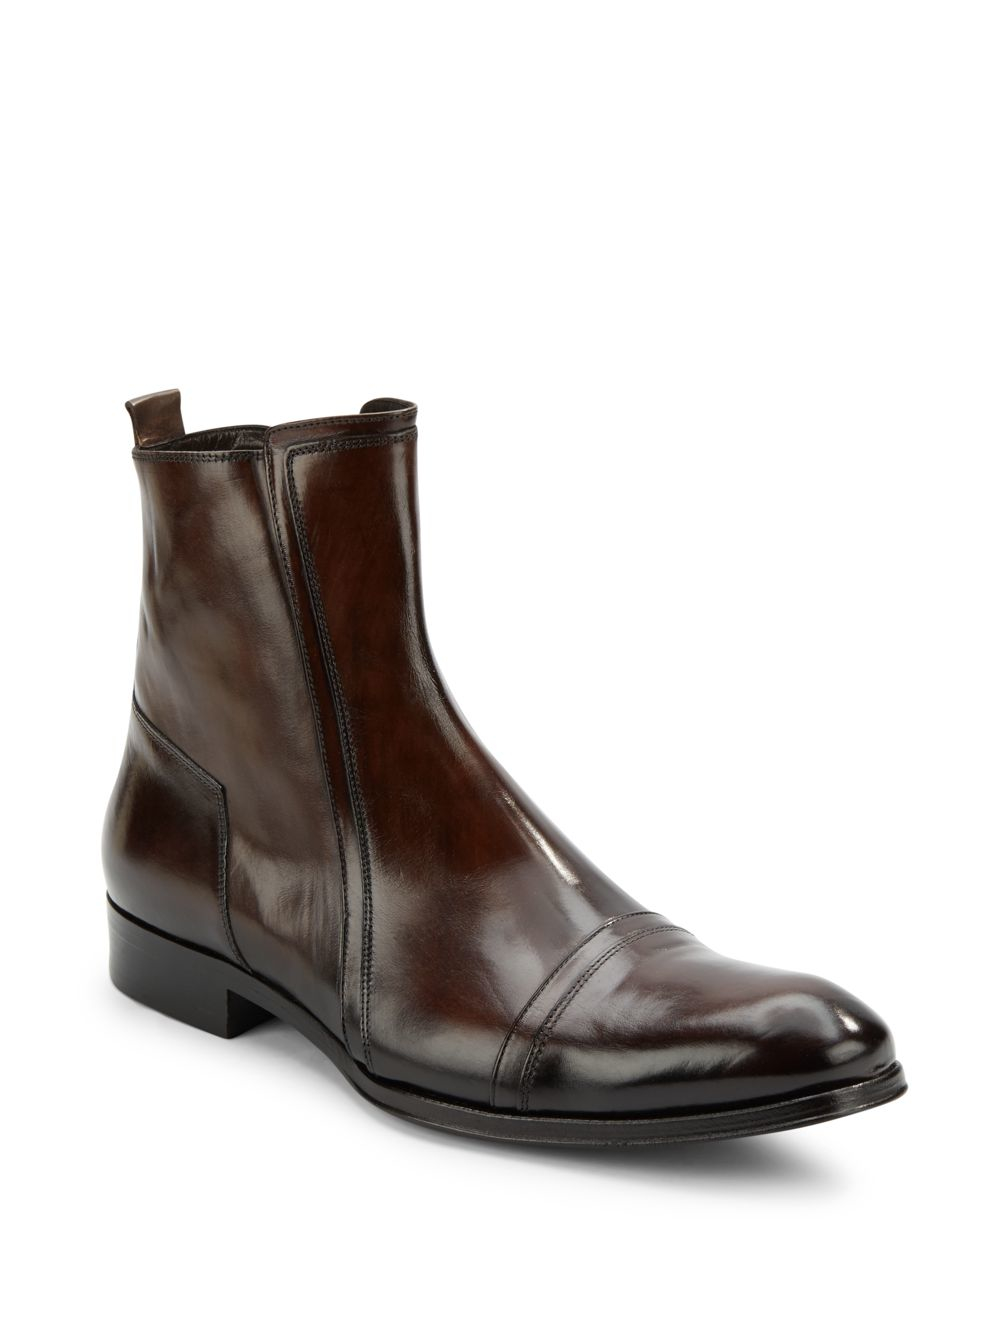 Lyst - Jo Ghost Square Toe Leather Ankle Boots in Brown for Men